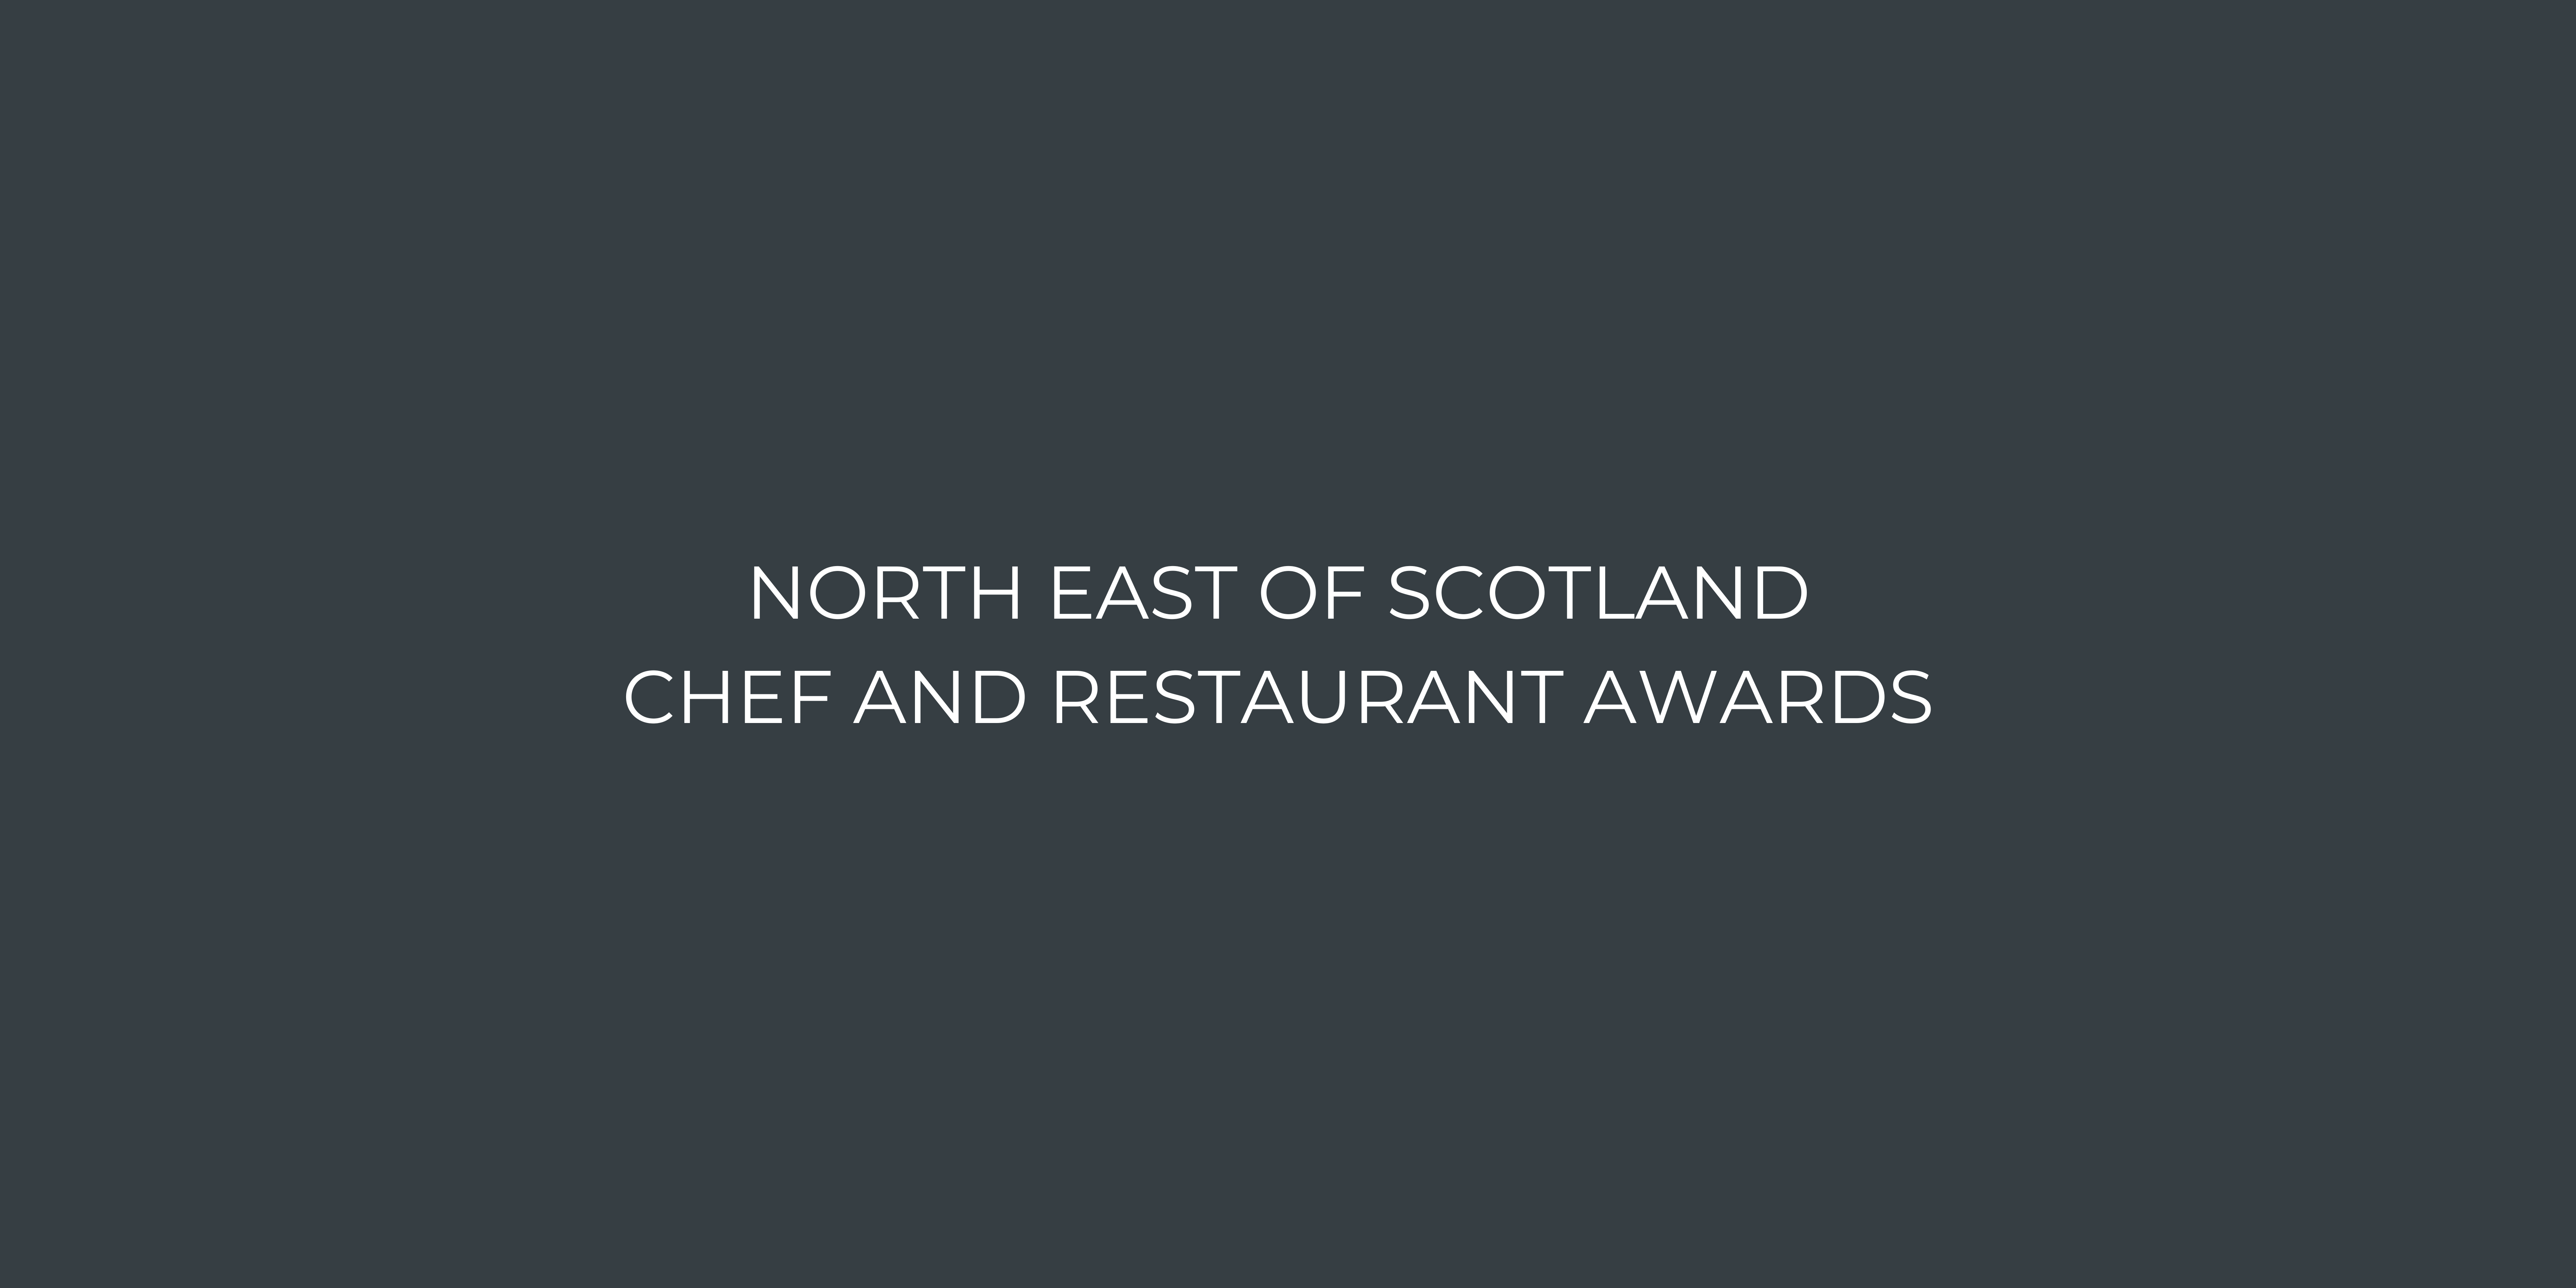 North East of Scotland Chef and Restaurant Awards